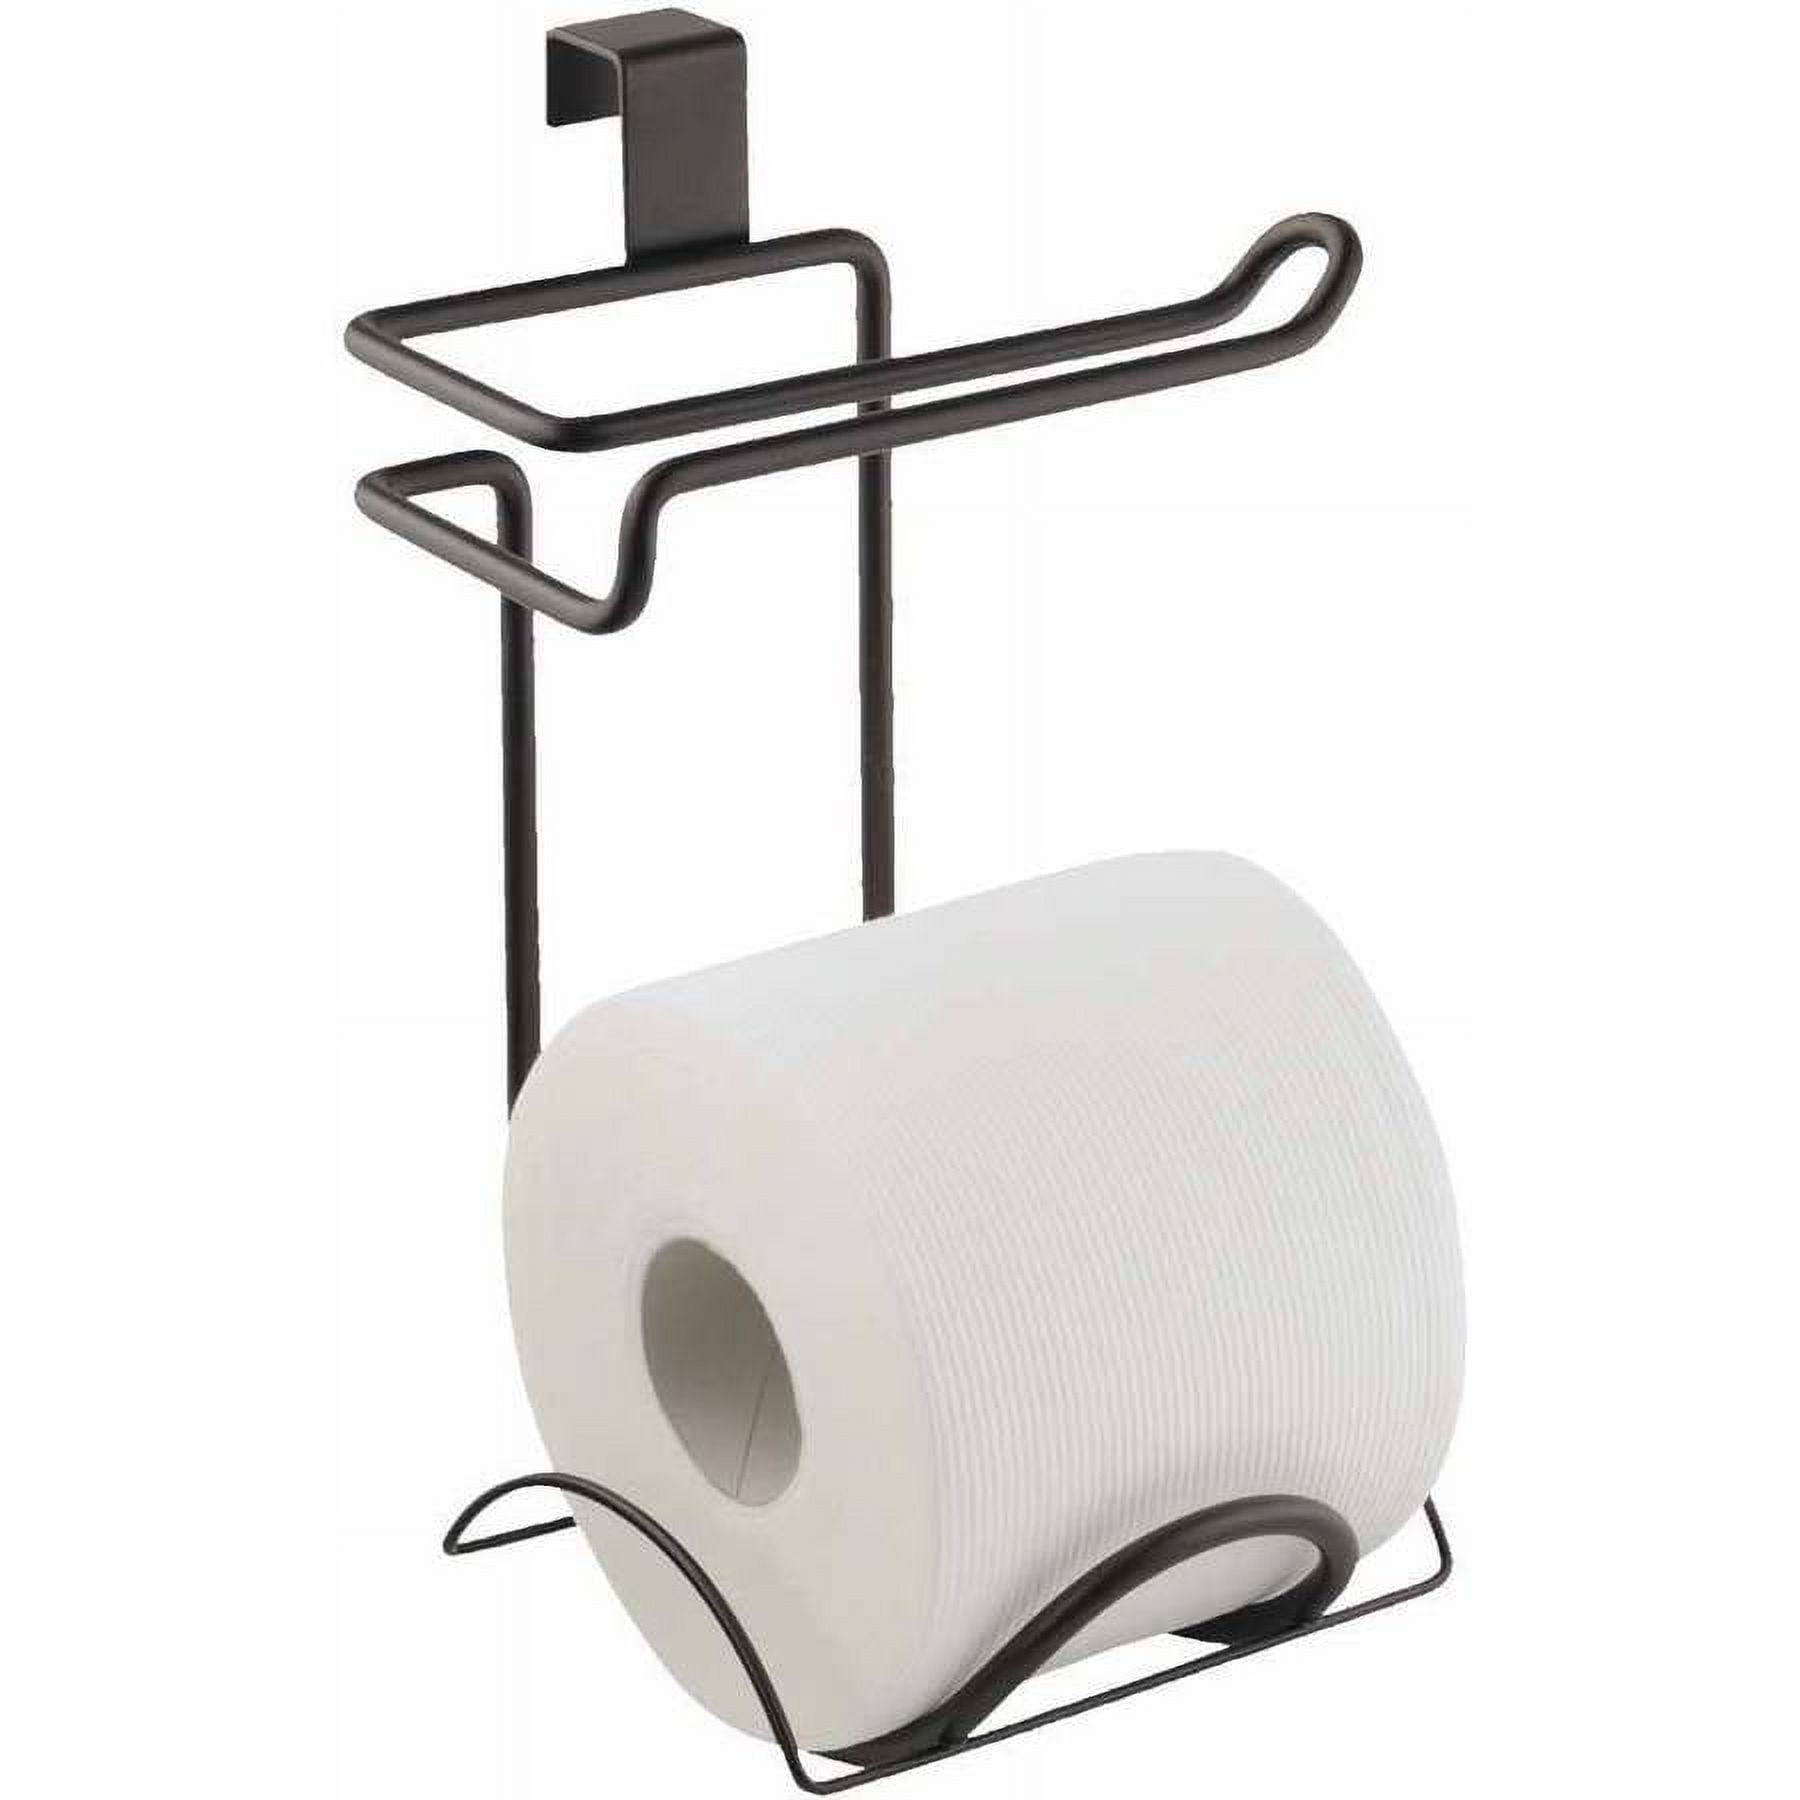 Ten designs that reimagine the humble toilet roll holder